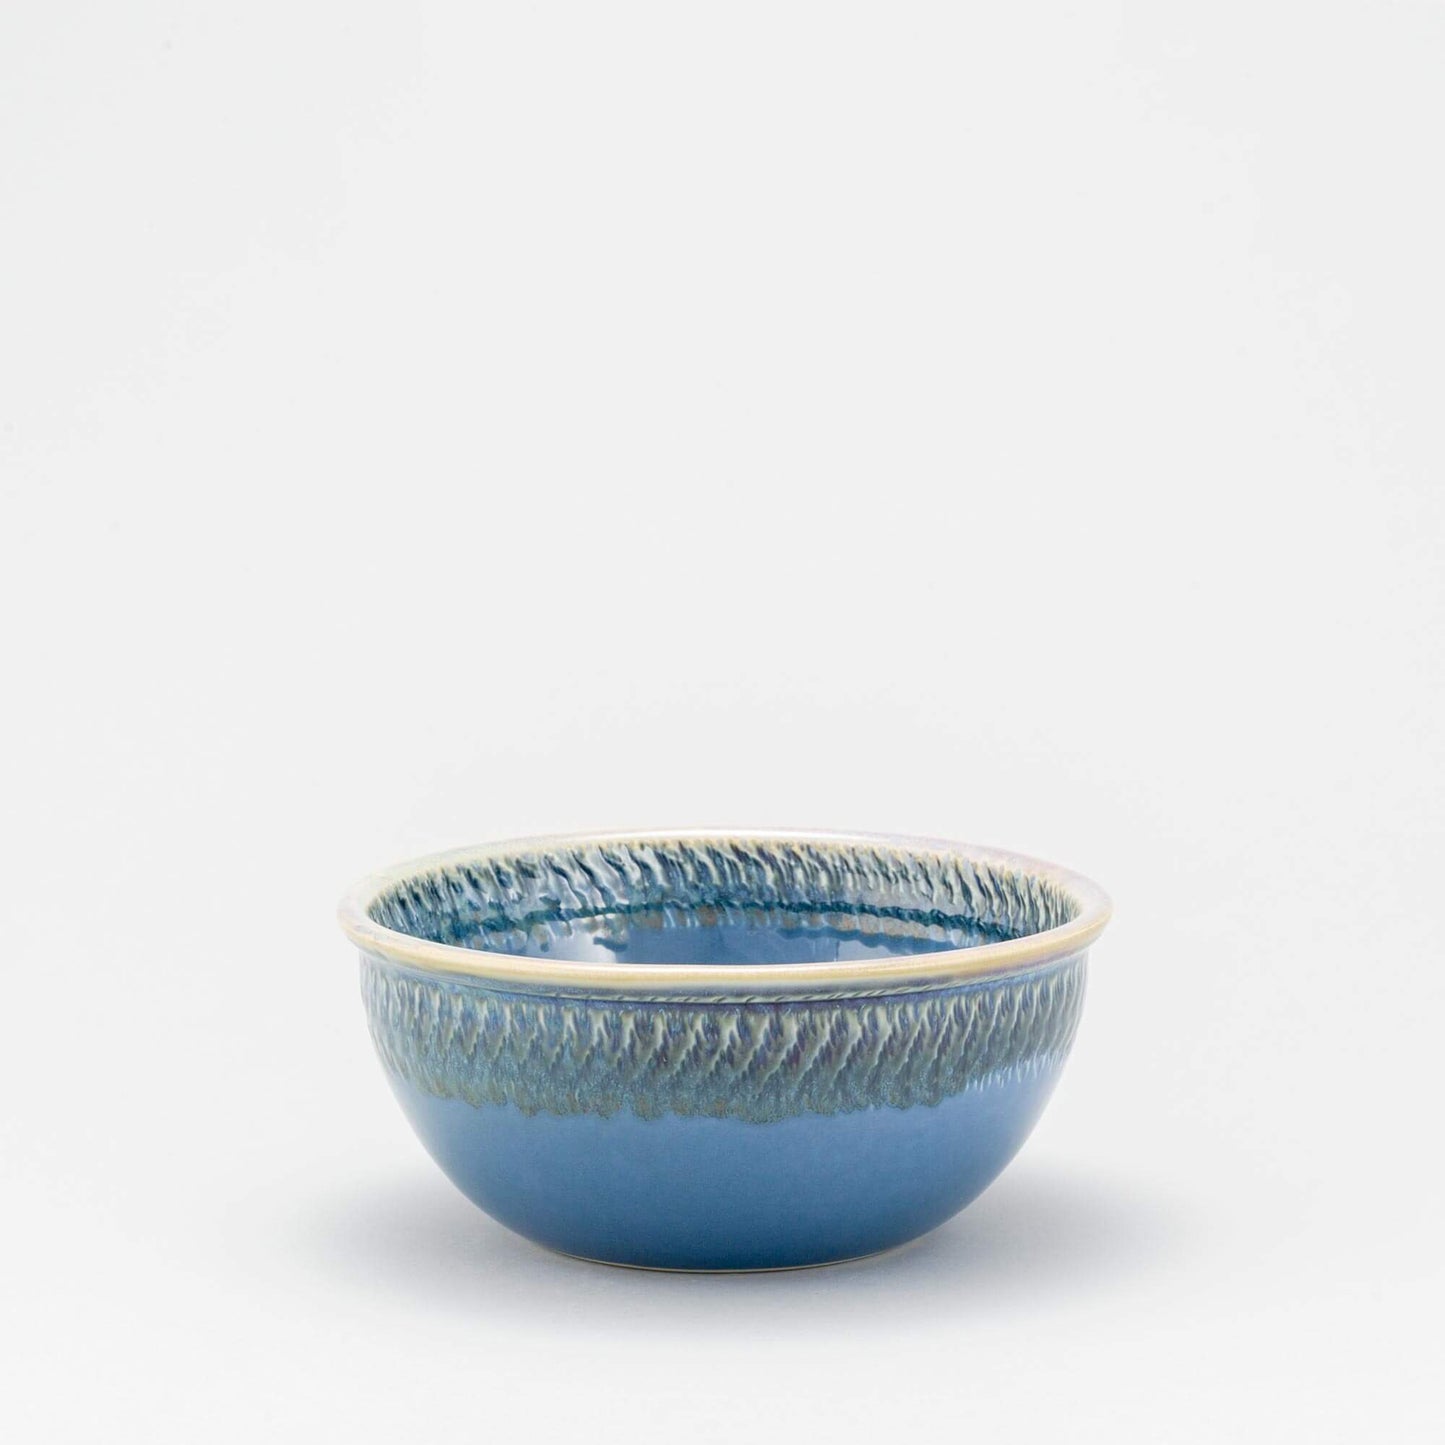 Handmade Pottery 8 Inch Mixing Bowl in Blue Oribe pattern made by Georgetown Pottery in Maine